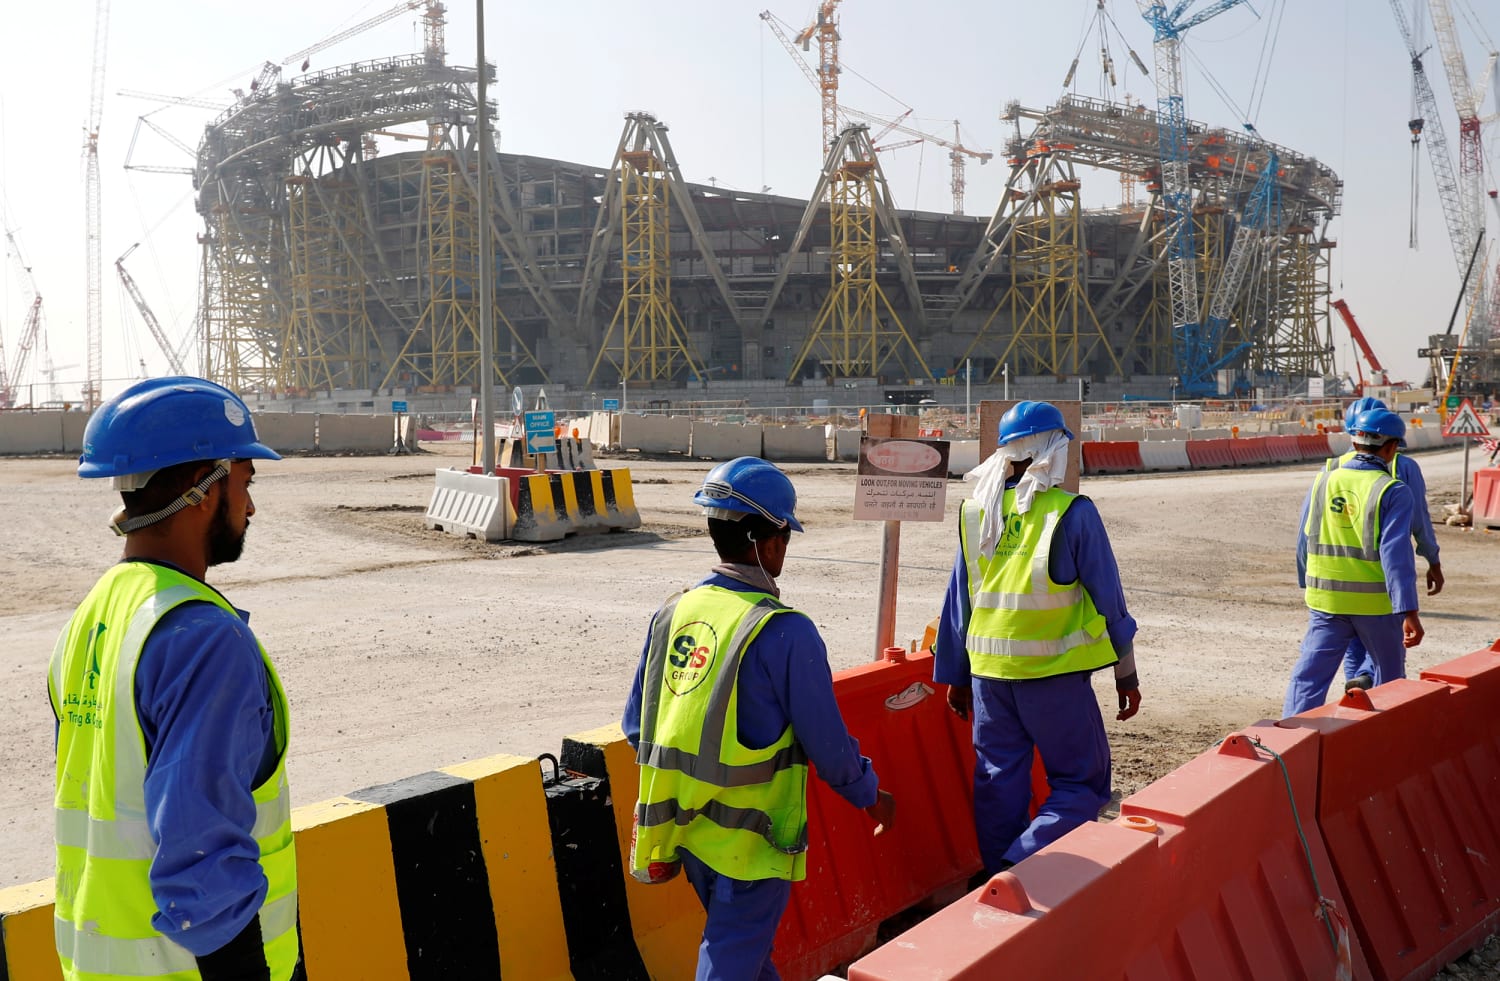 A year from World Cup, migrant workers exploited in Qatar fight for change